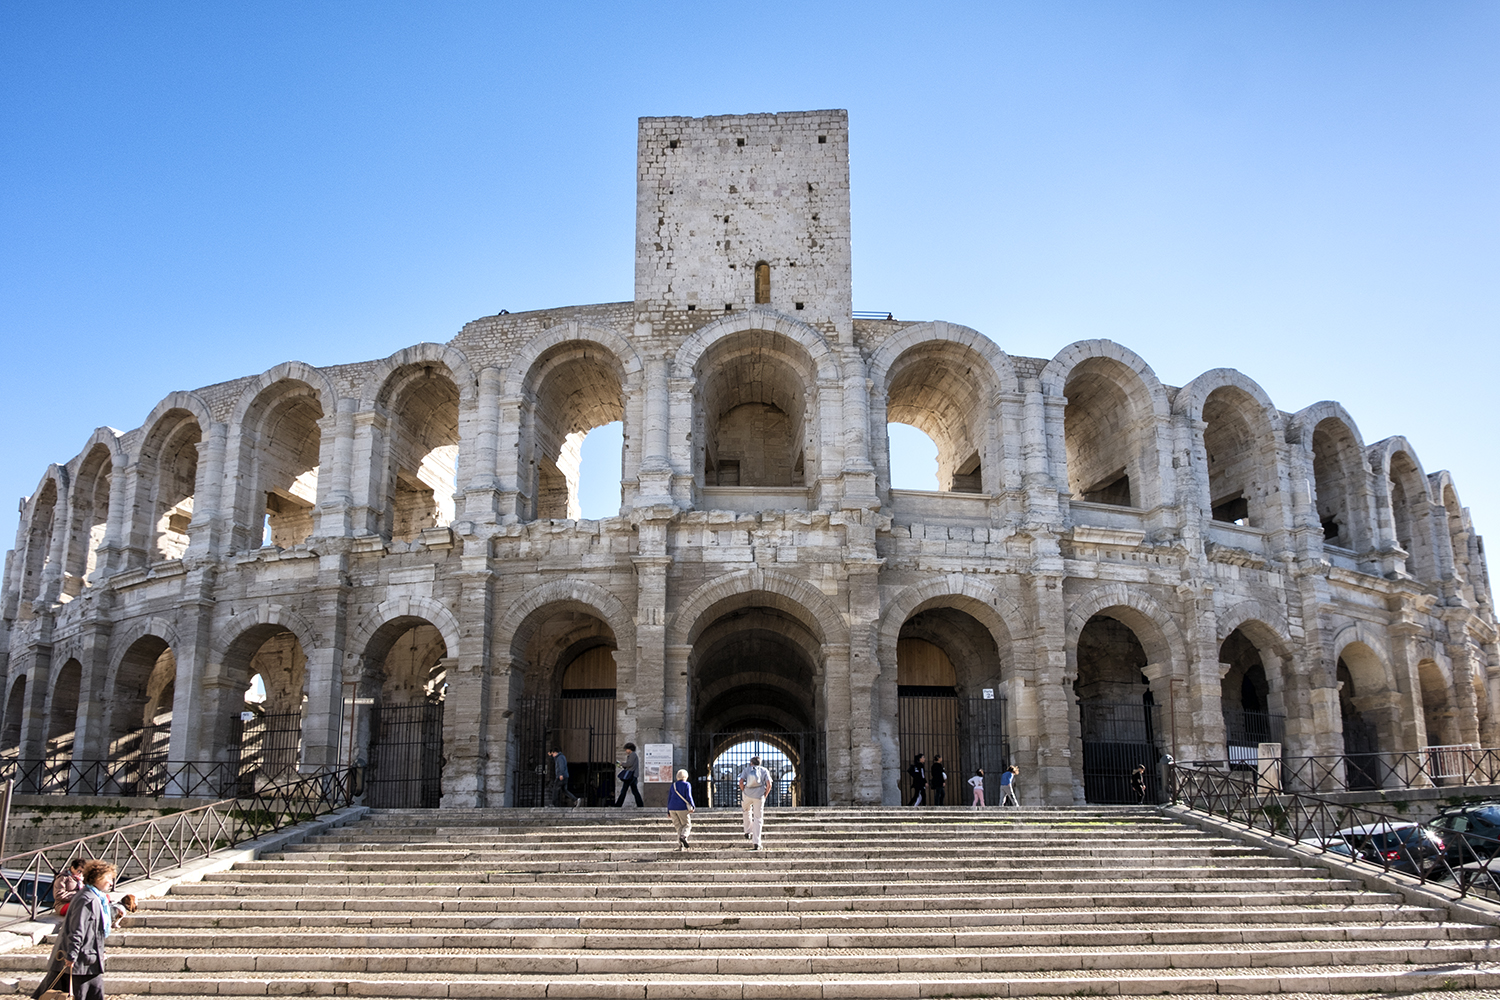 The Arena in Arles